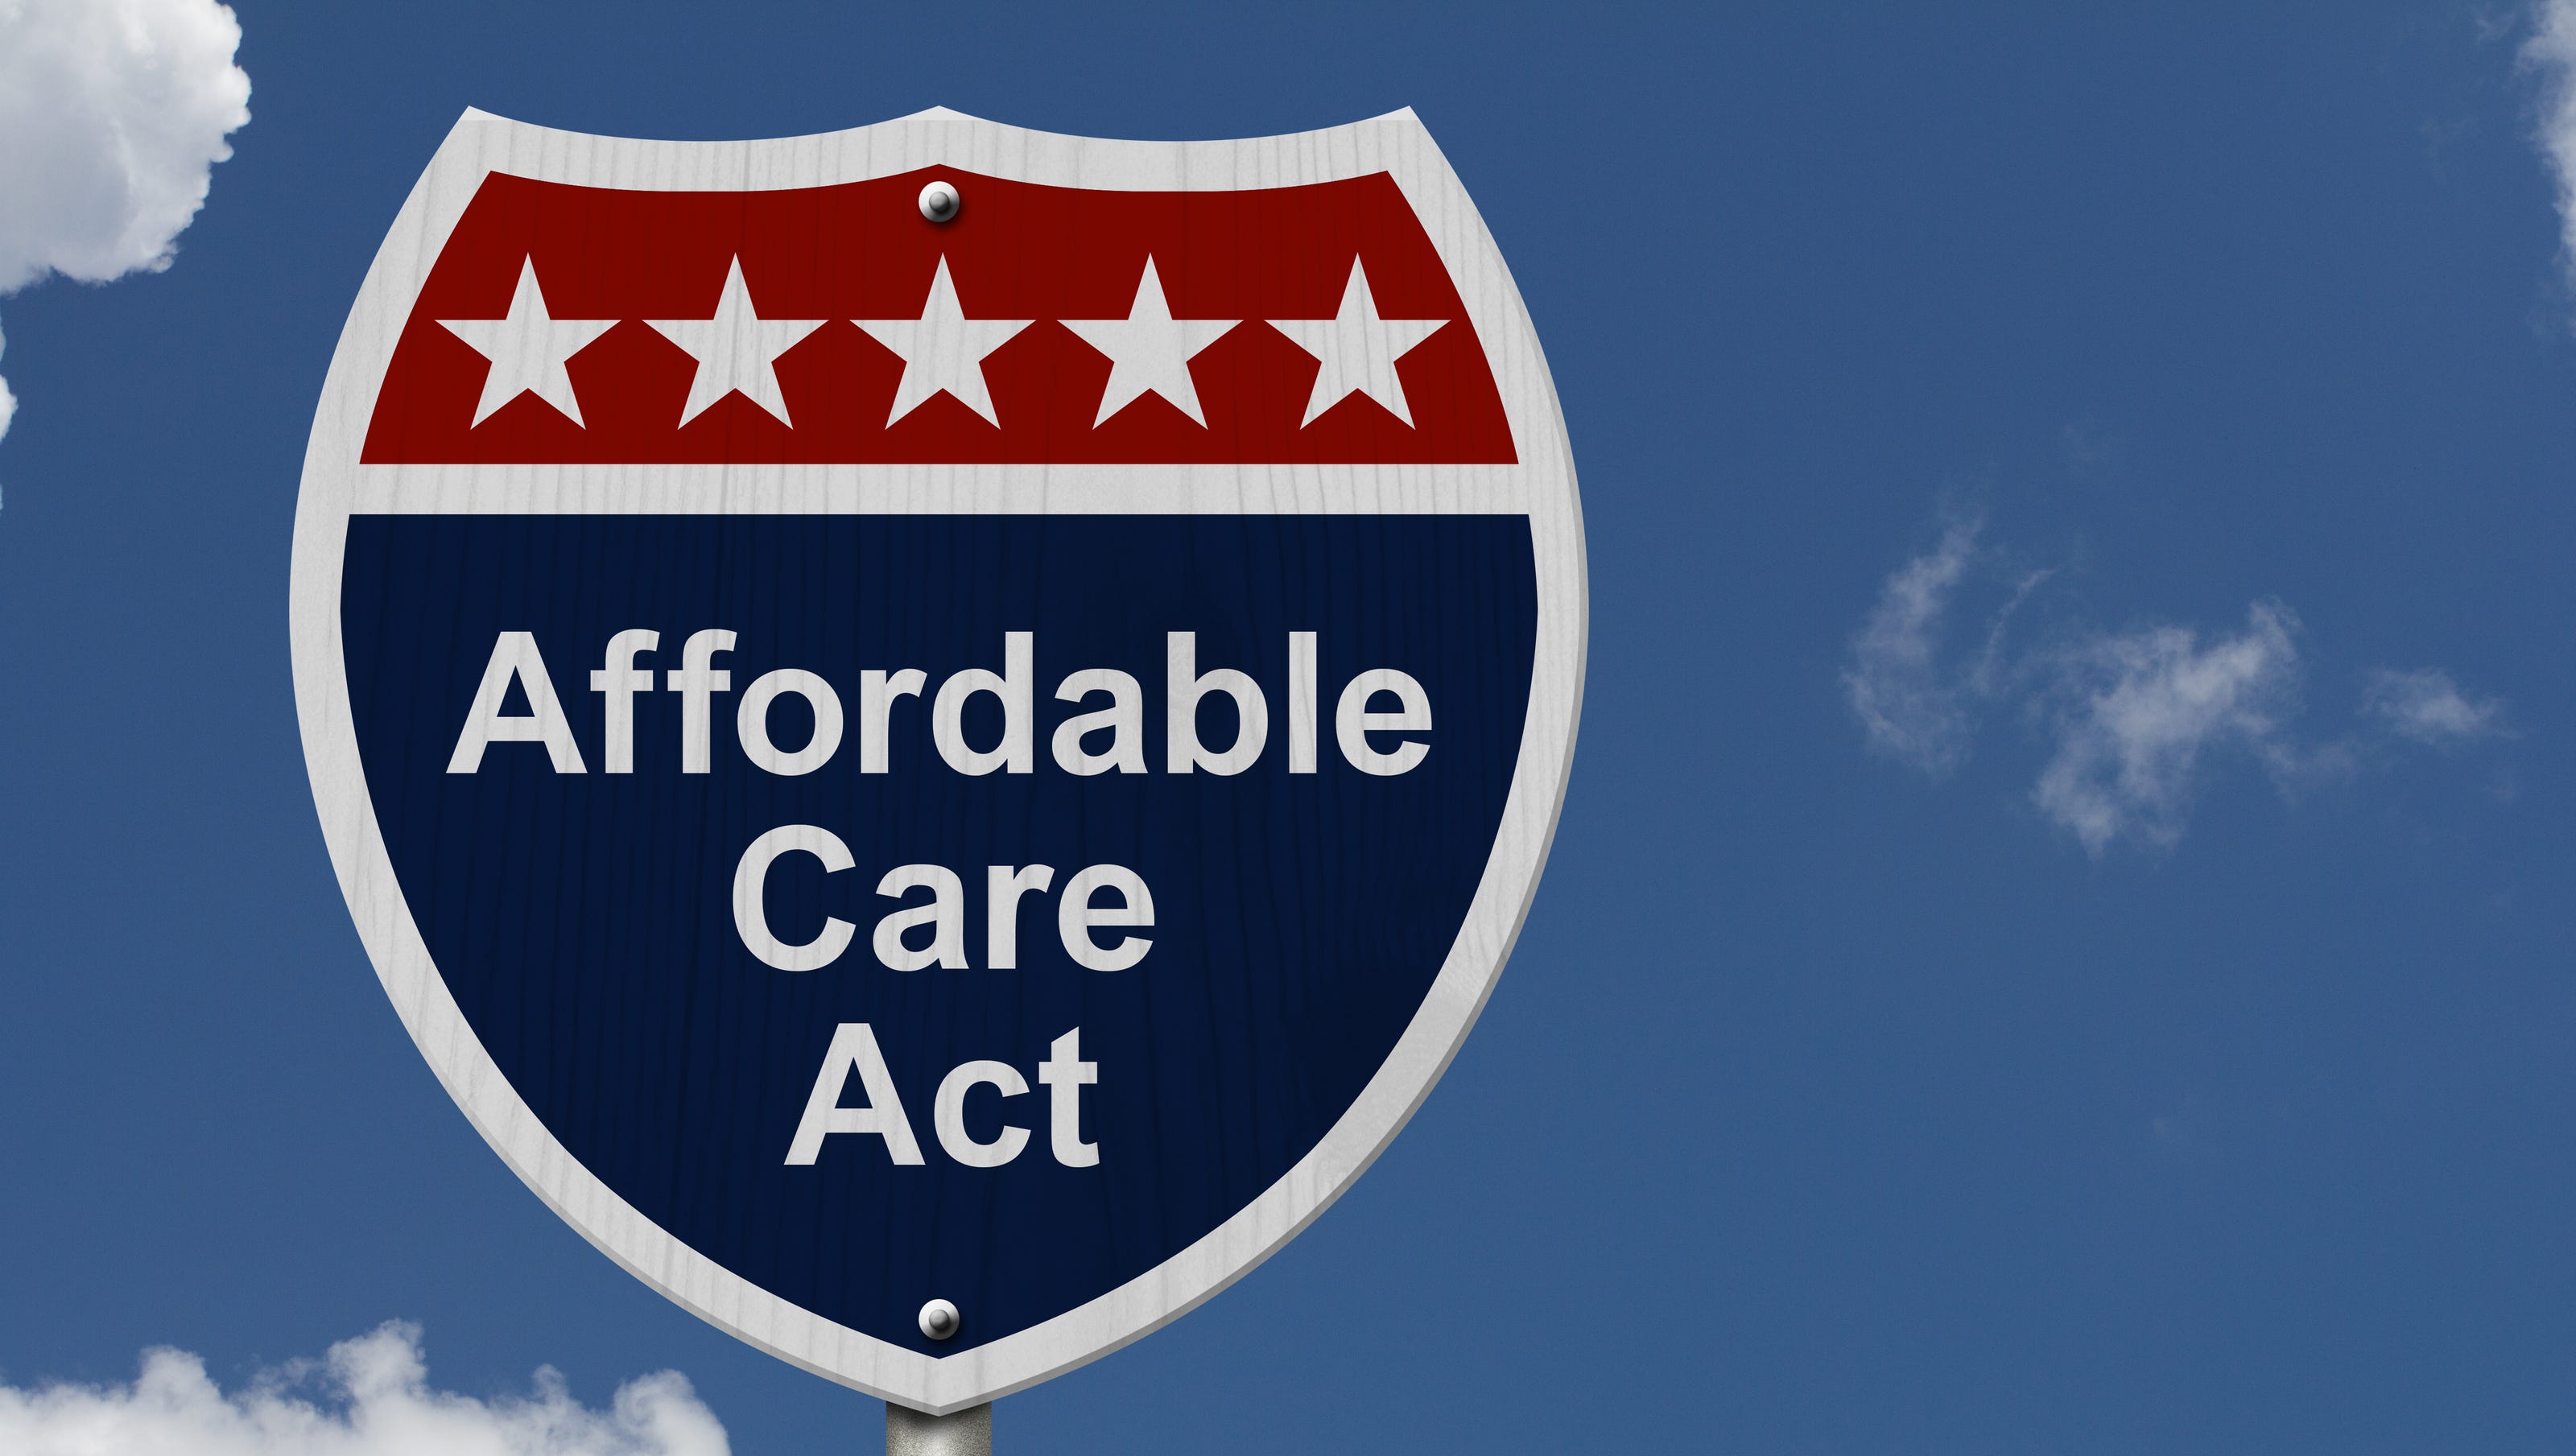 Need health insurance? Here's a quick primer on ACA and ...